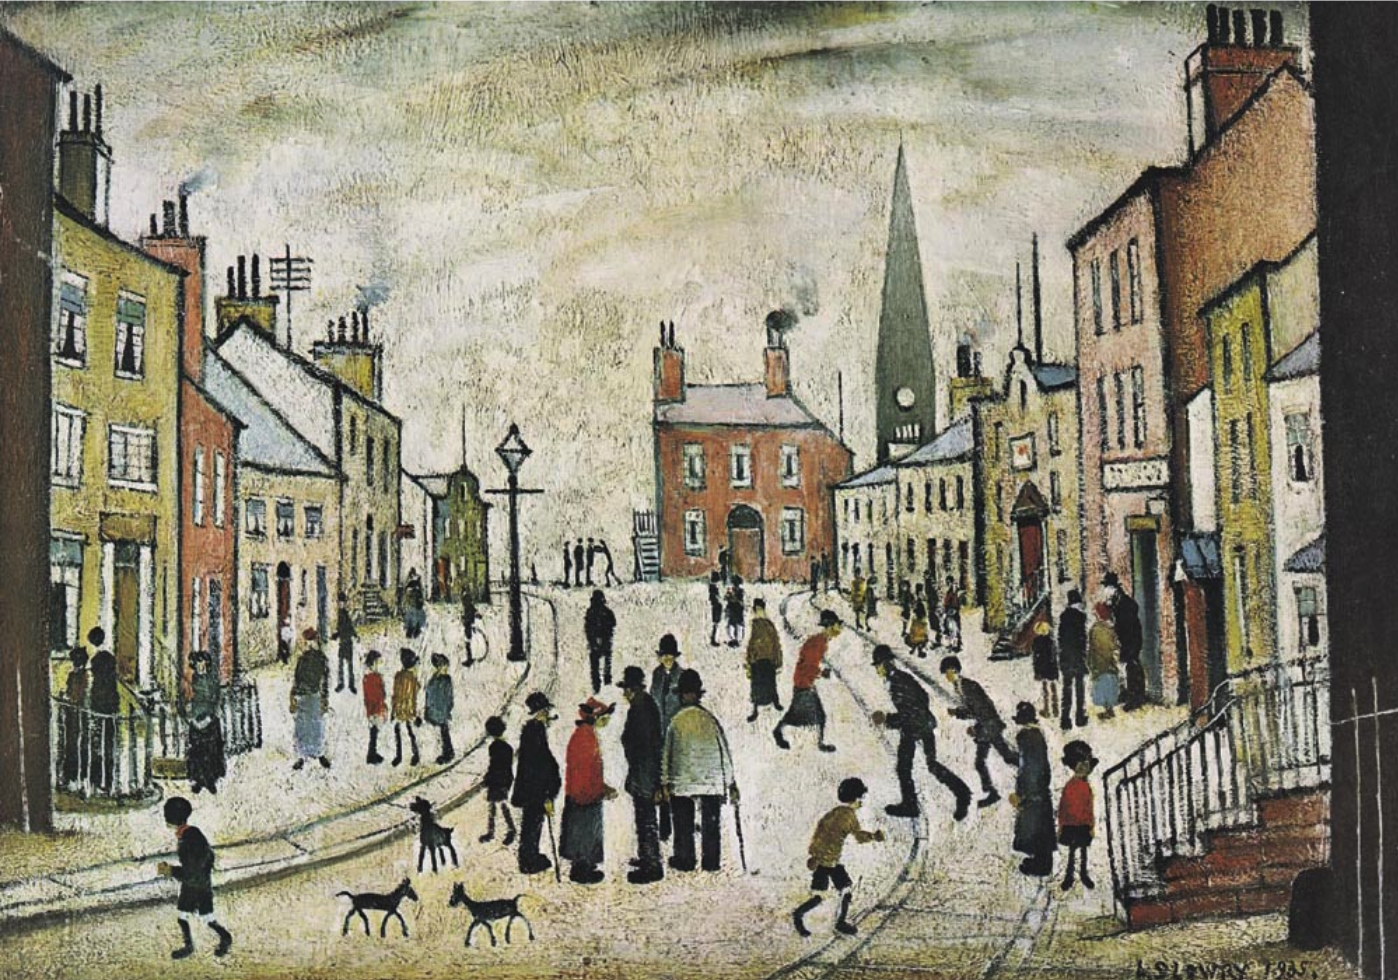 A Lancashire Village (Unknown) by Laurence Stephen Lowry (1887 - 1976), English artist.